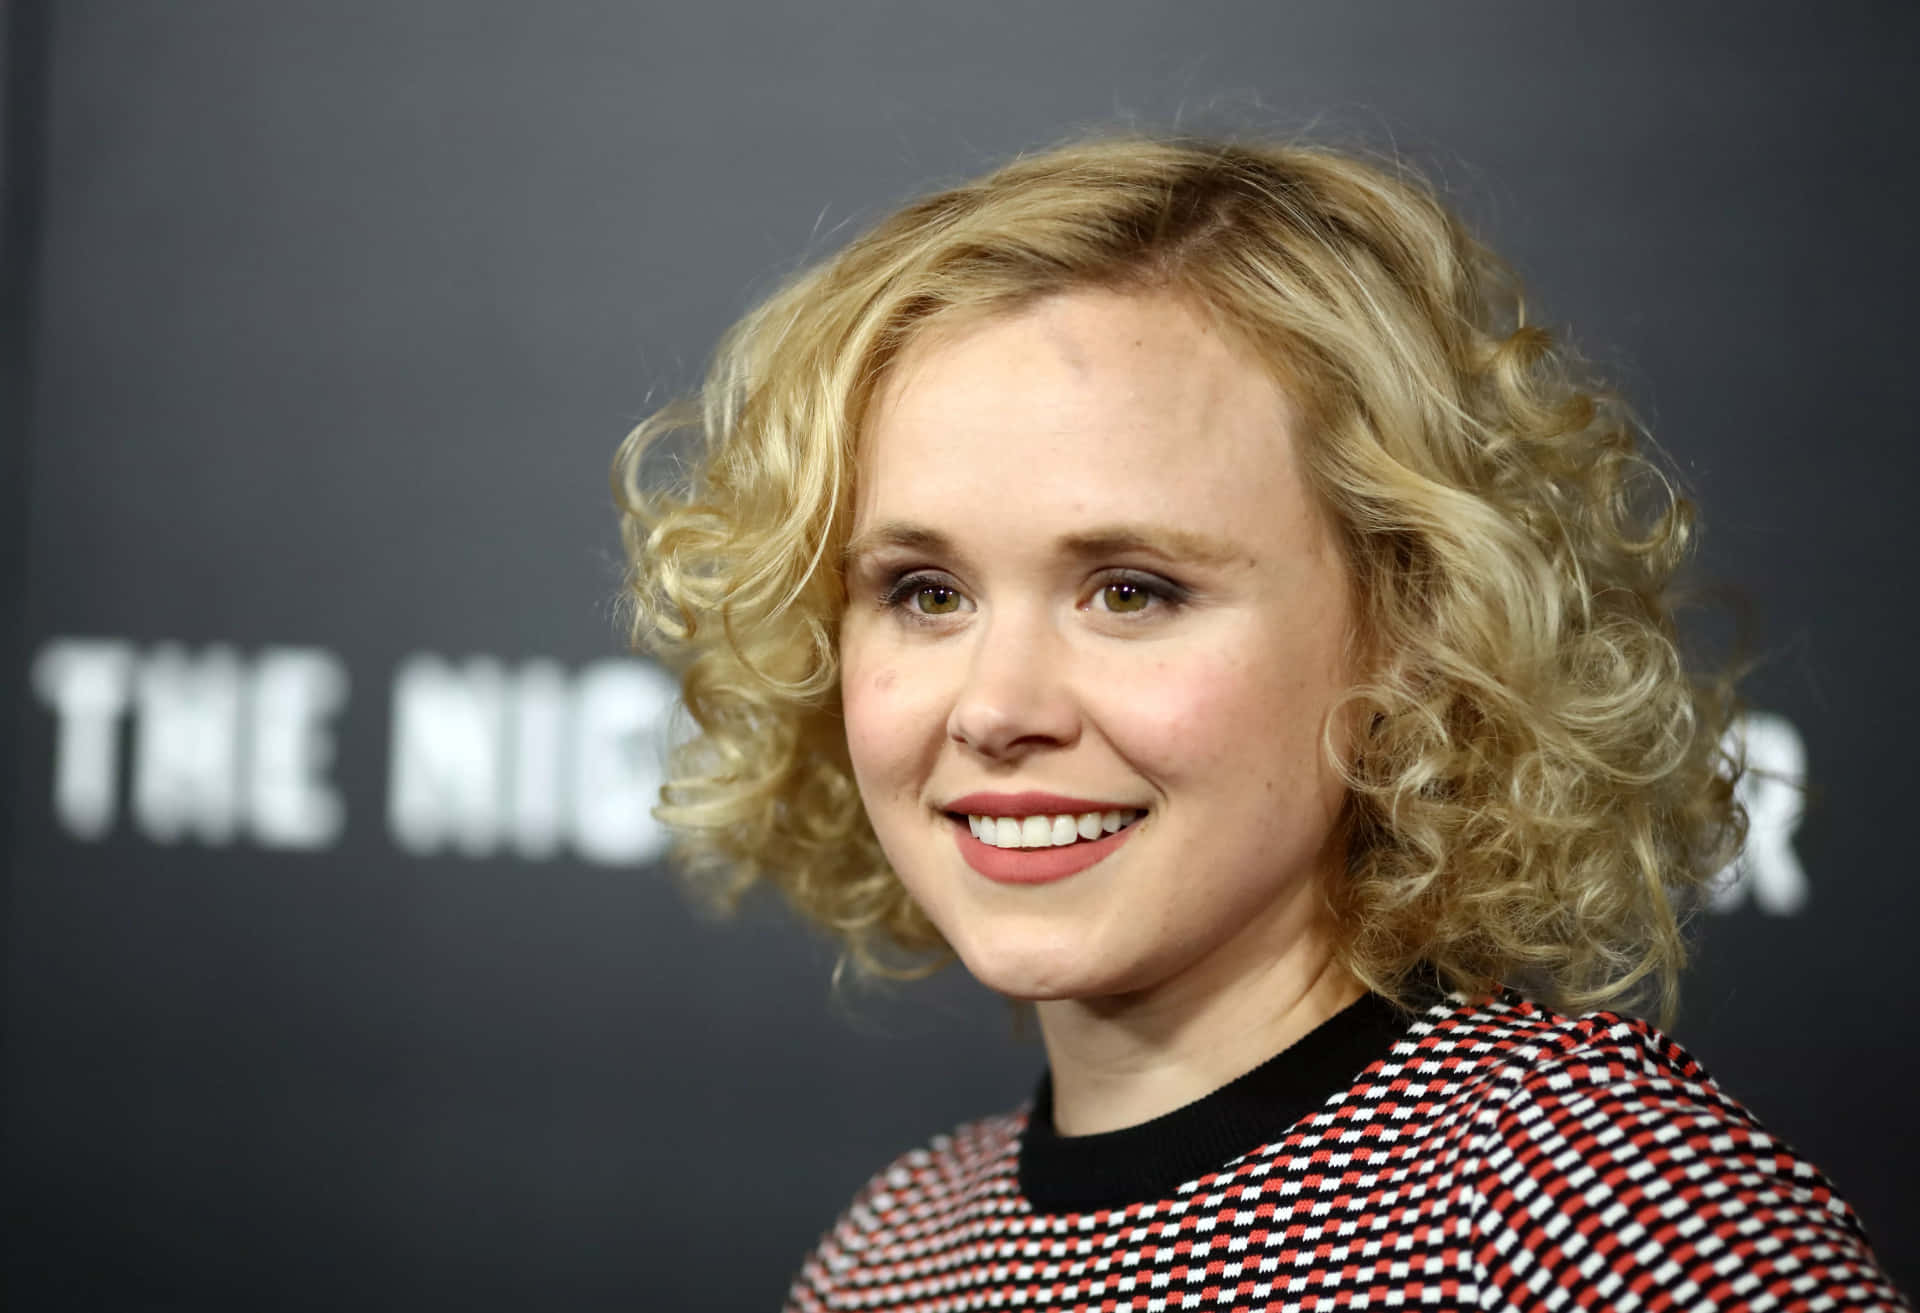 Alison Pill at a red carpet event Wallpaper